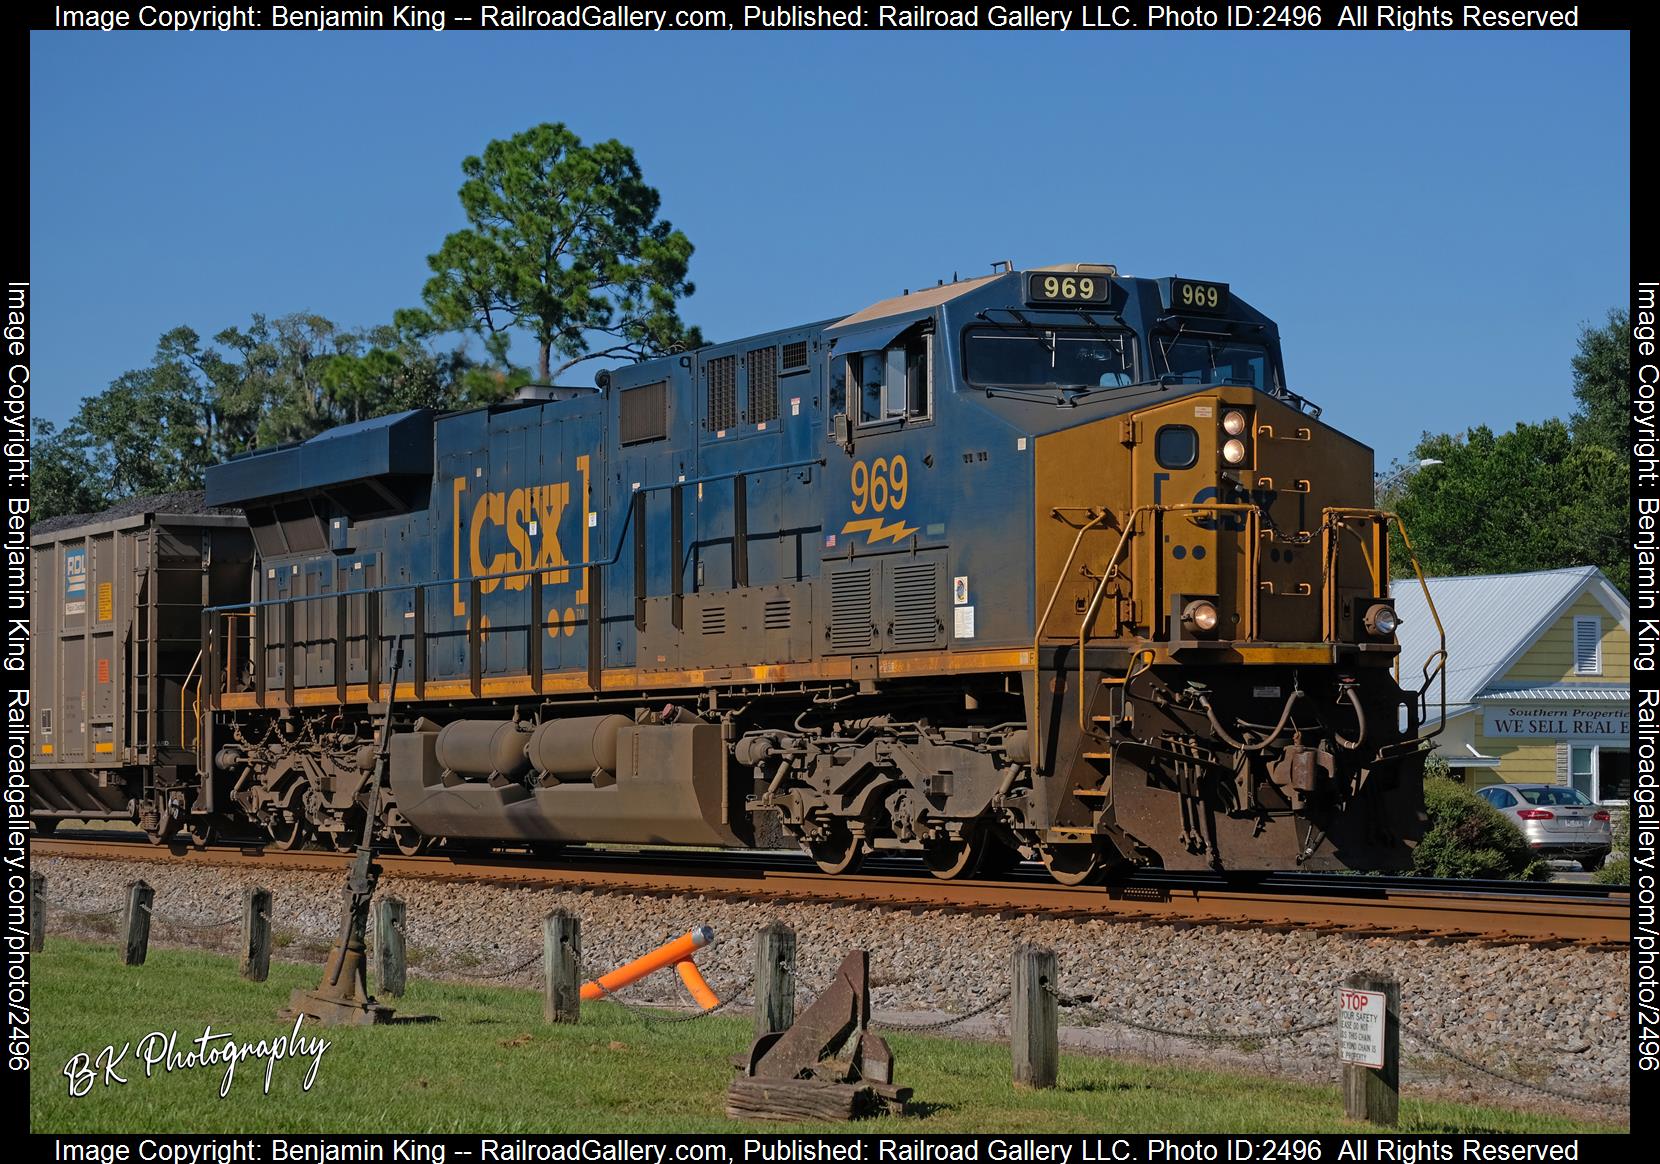 CSXT 969 is a class GE ES44AH and  is pictured in Folkston, Georgia, USA.  This was taken along the CSXT Nahunta Subdivision on the CSX Transportation. Photo Copyright: Benjamin King uploaded to Railroad Gallery on 11/26/2023. This photograph of CSXT 969 was taken on Sunday, September 26, 2021. All Rights Reserved. 